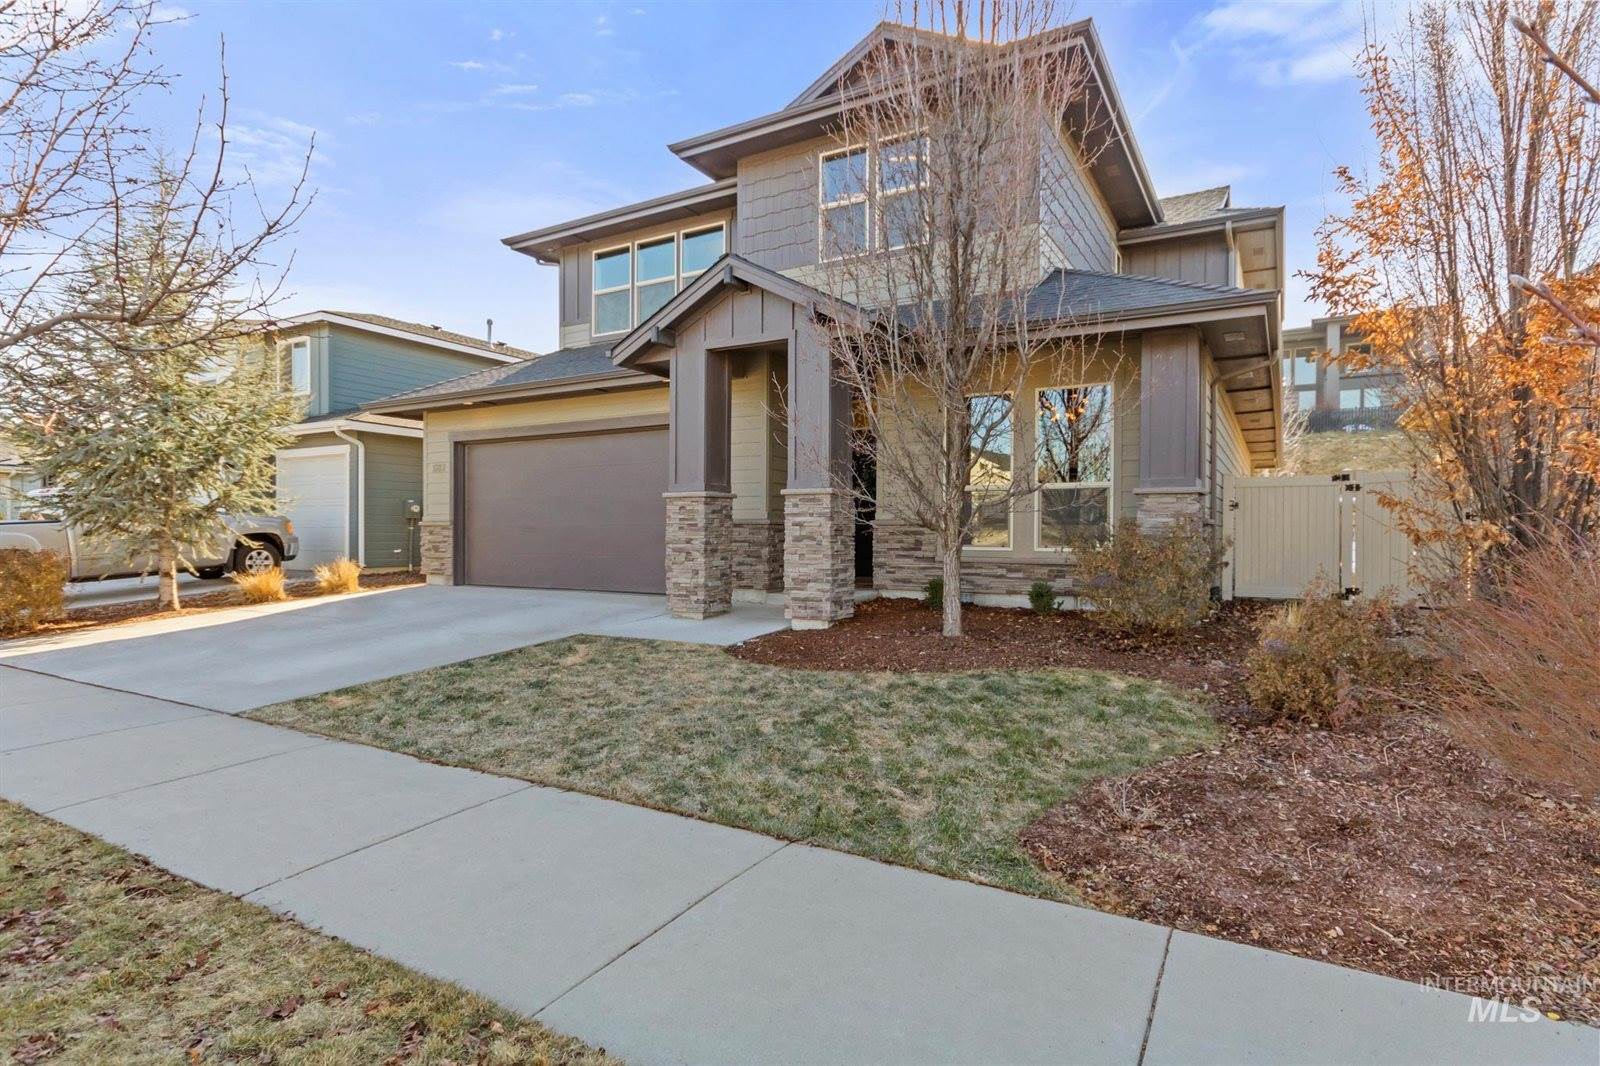 1083 E Wrightwood Dr, Meridian, ID 83642